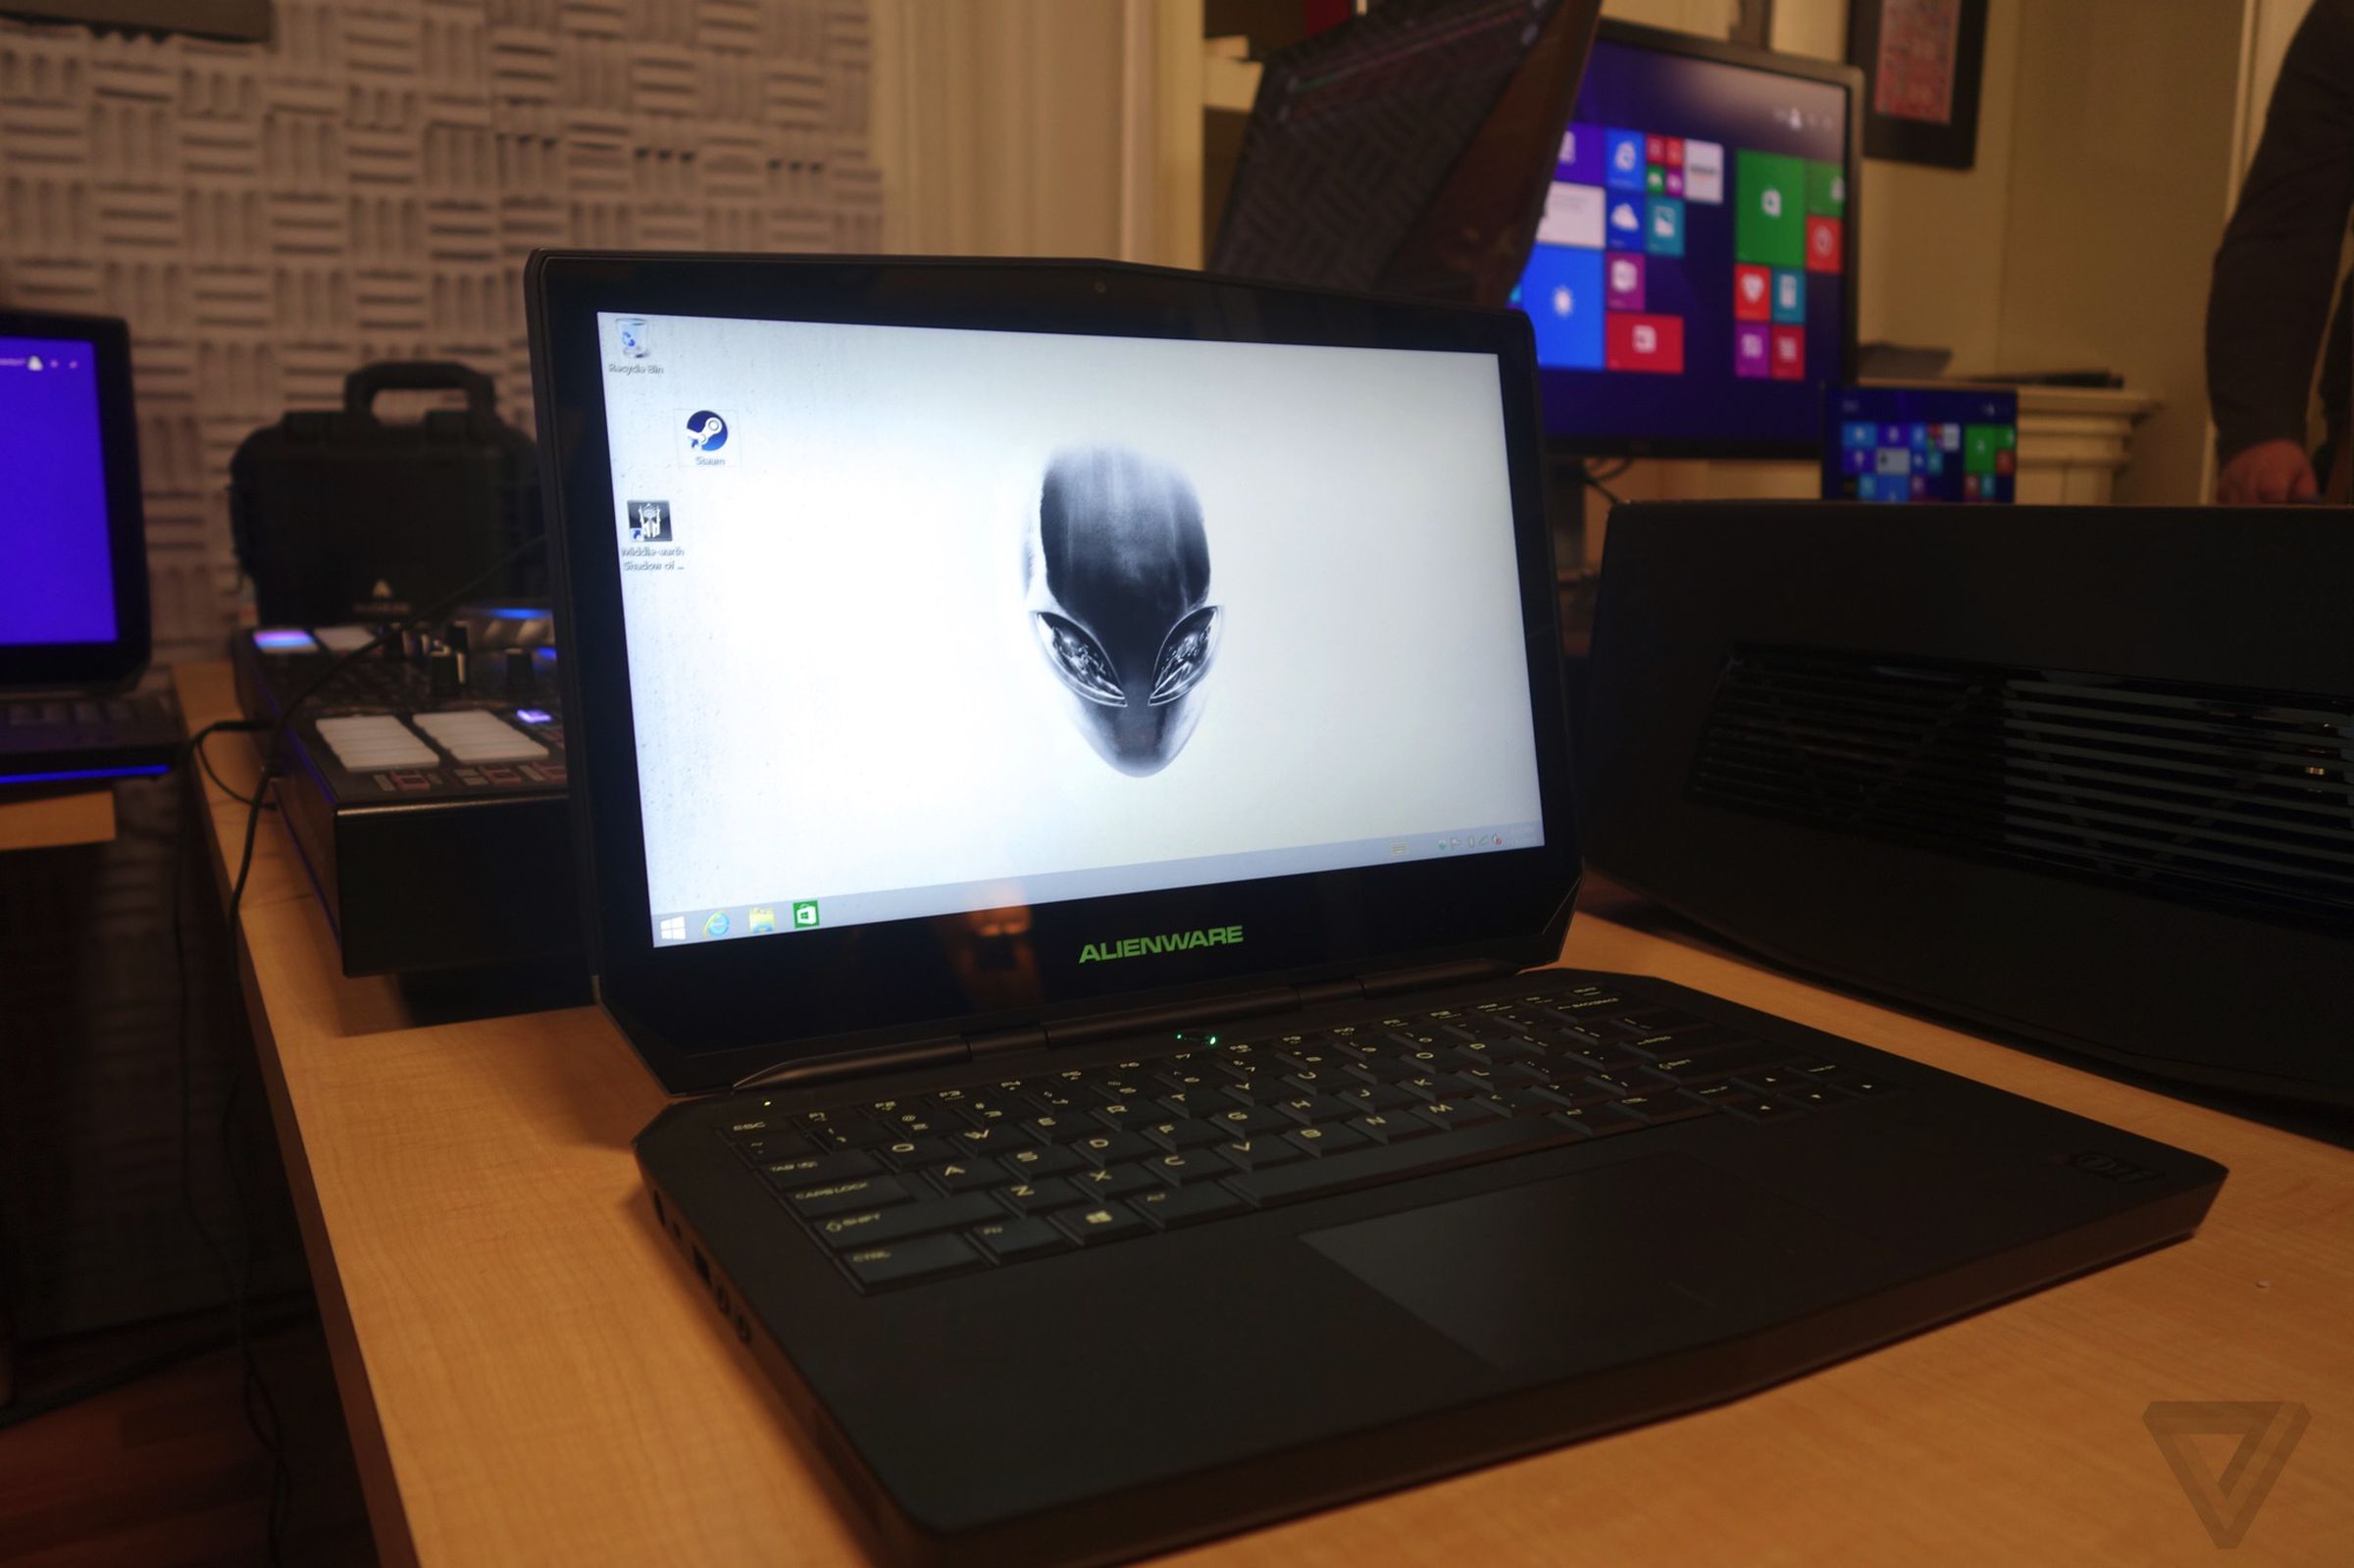 Dell's Alienware 15 and 17 in photos